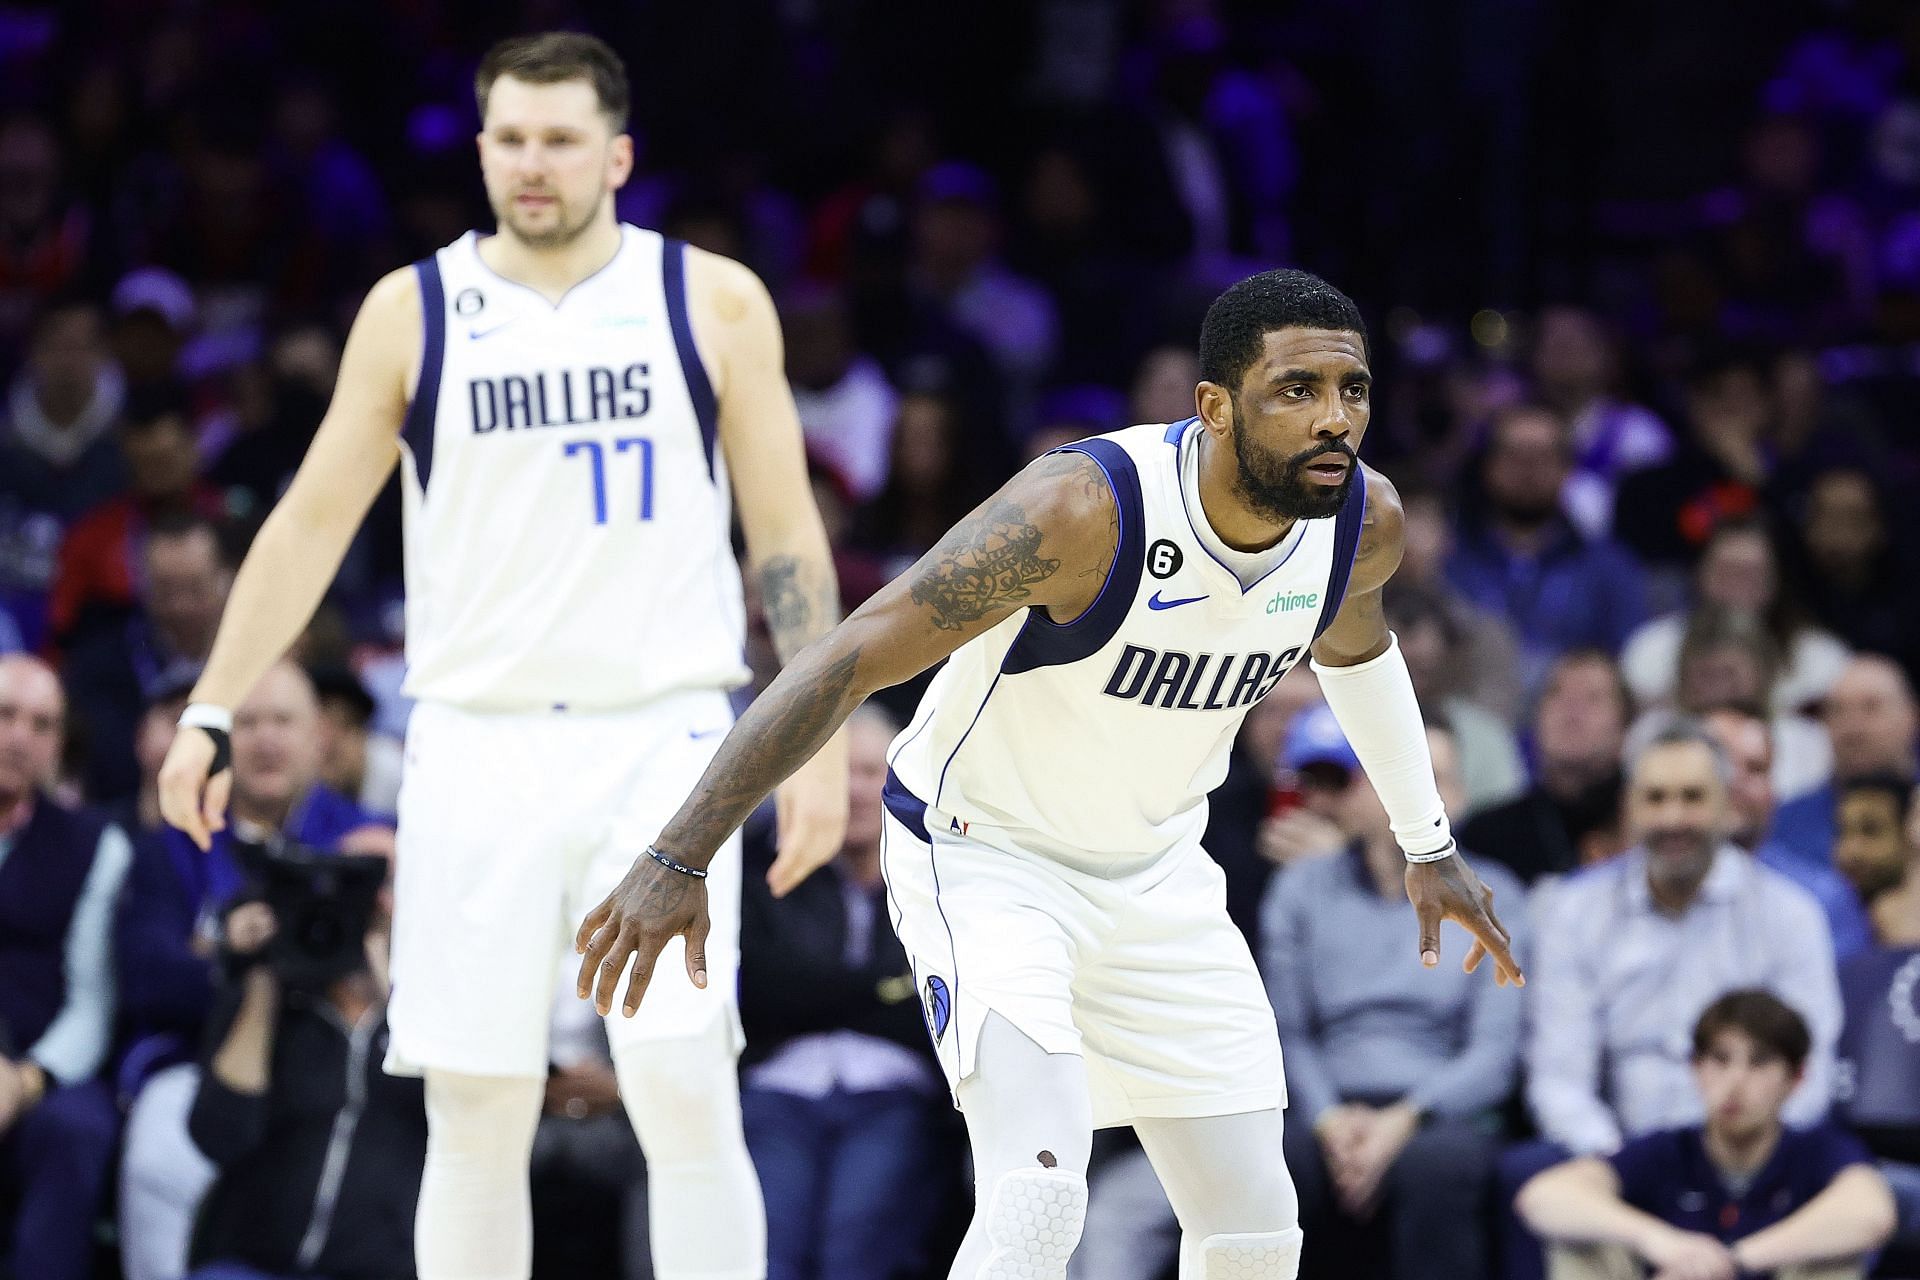 Nba Rumors Dallas Mavericks Will Look To Re Sign All Star In Free Agency